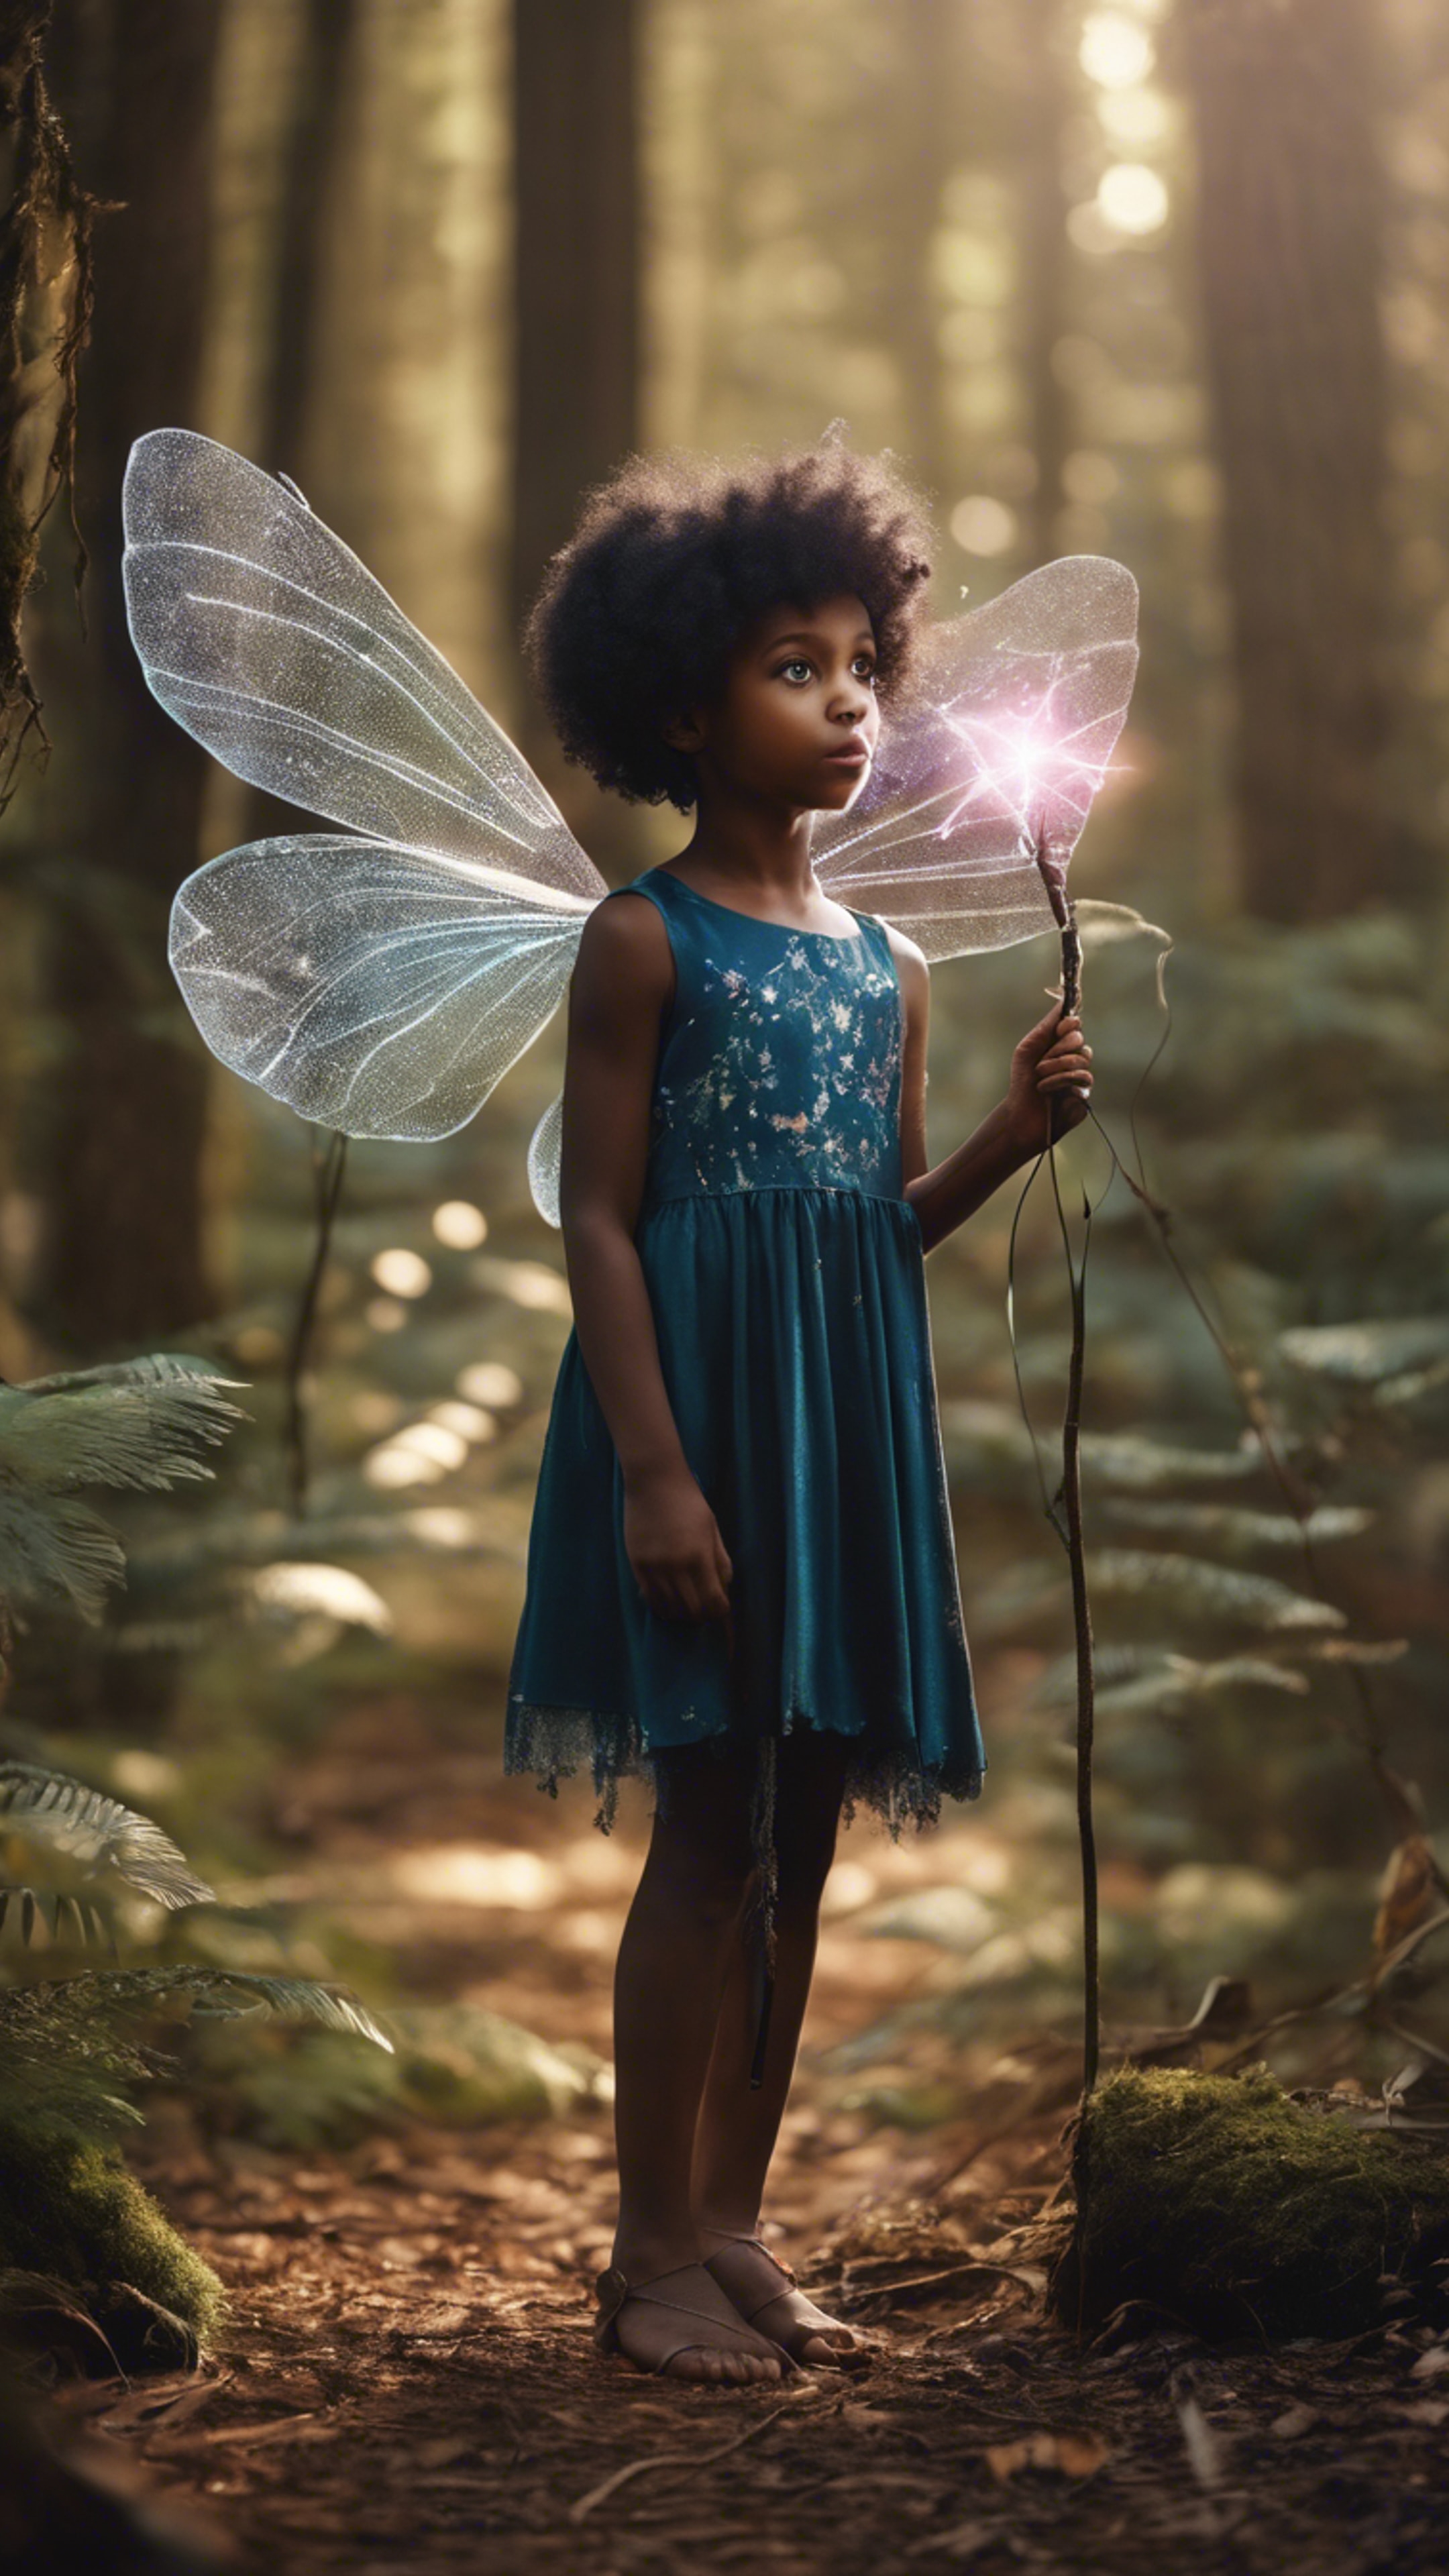 A cute image of a black girl wearing fairy wings, holding a magic wand in a mystical forest.壁紙[6c77347a4892474c928d]